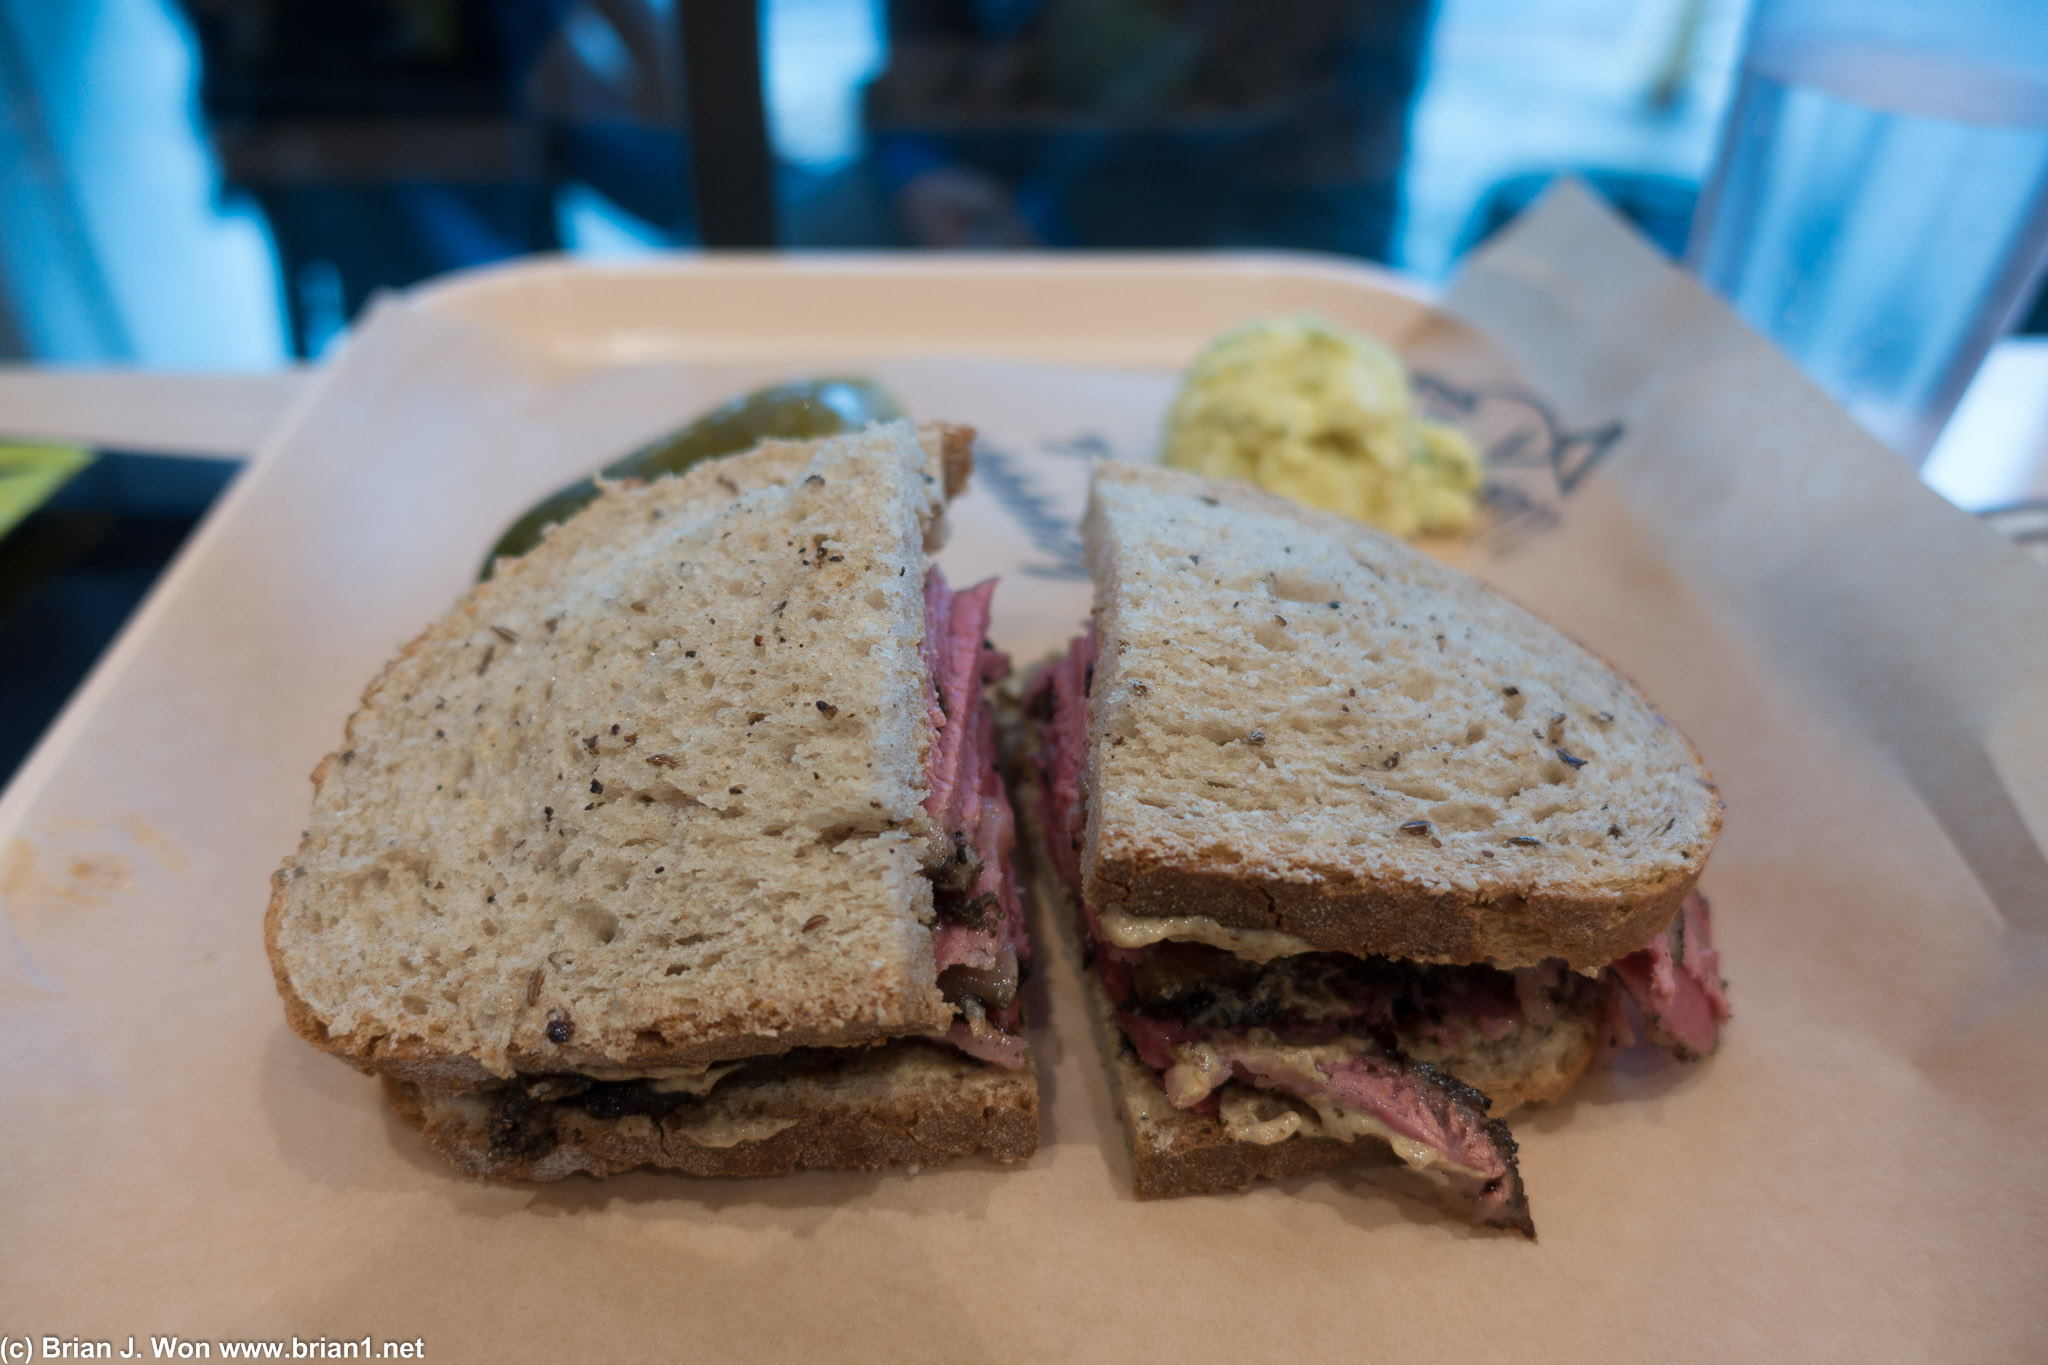 Pastrami sandwich with potato salad and pickle.